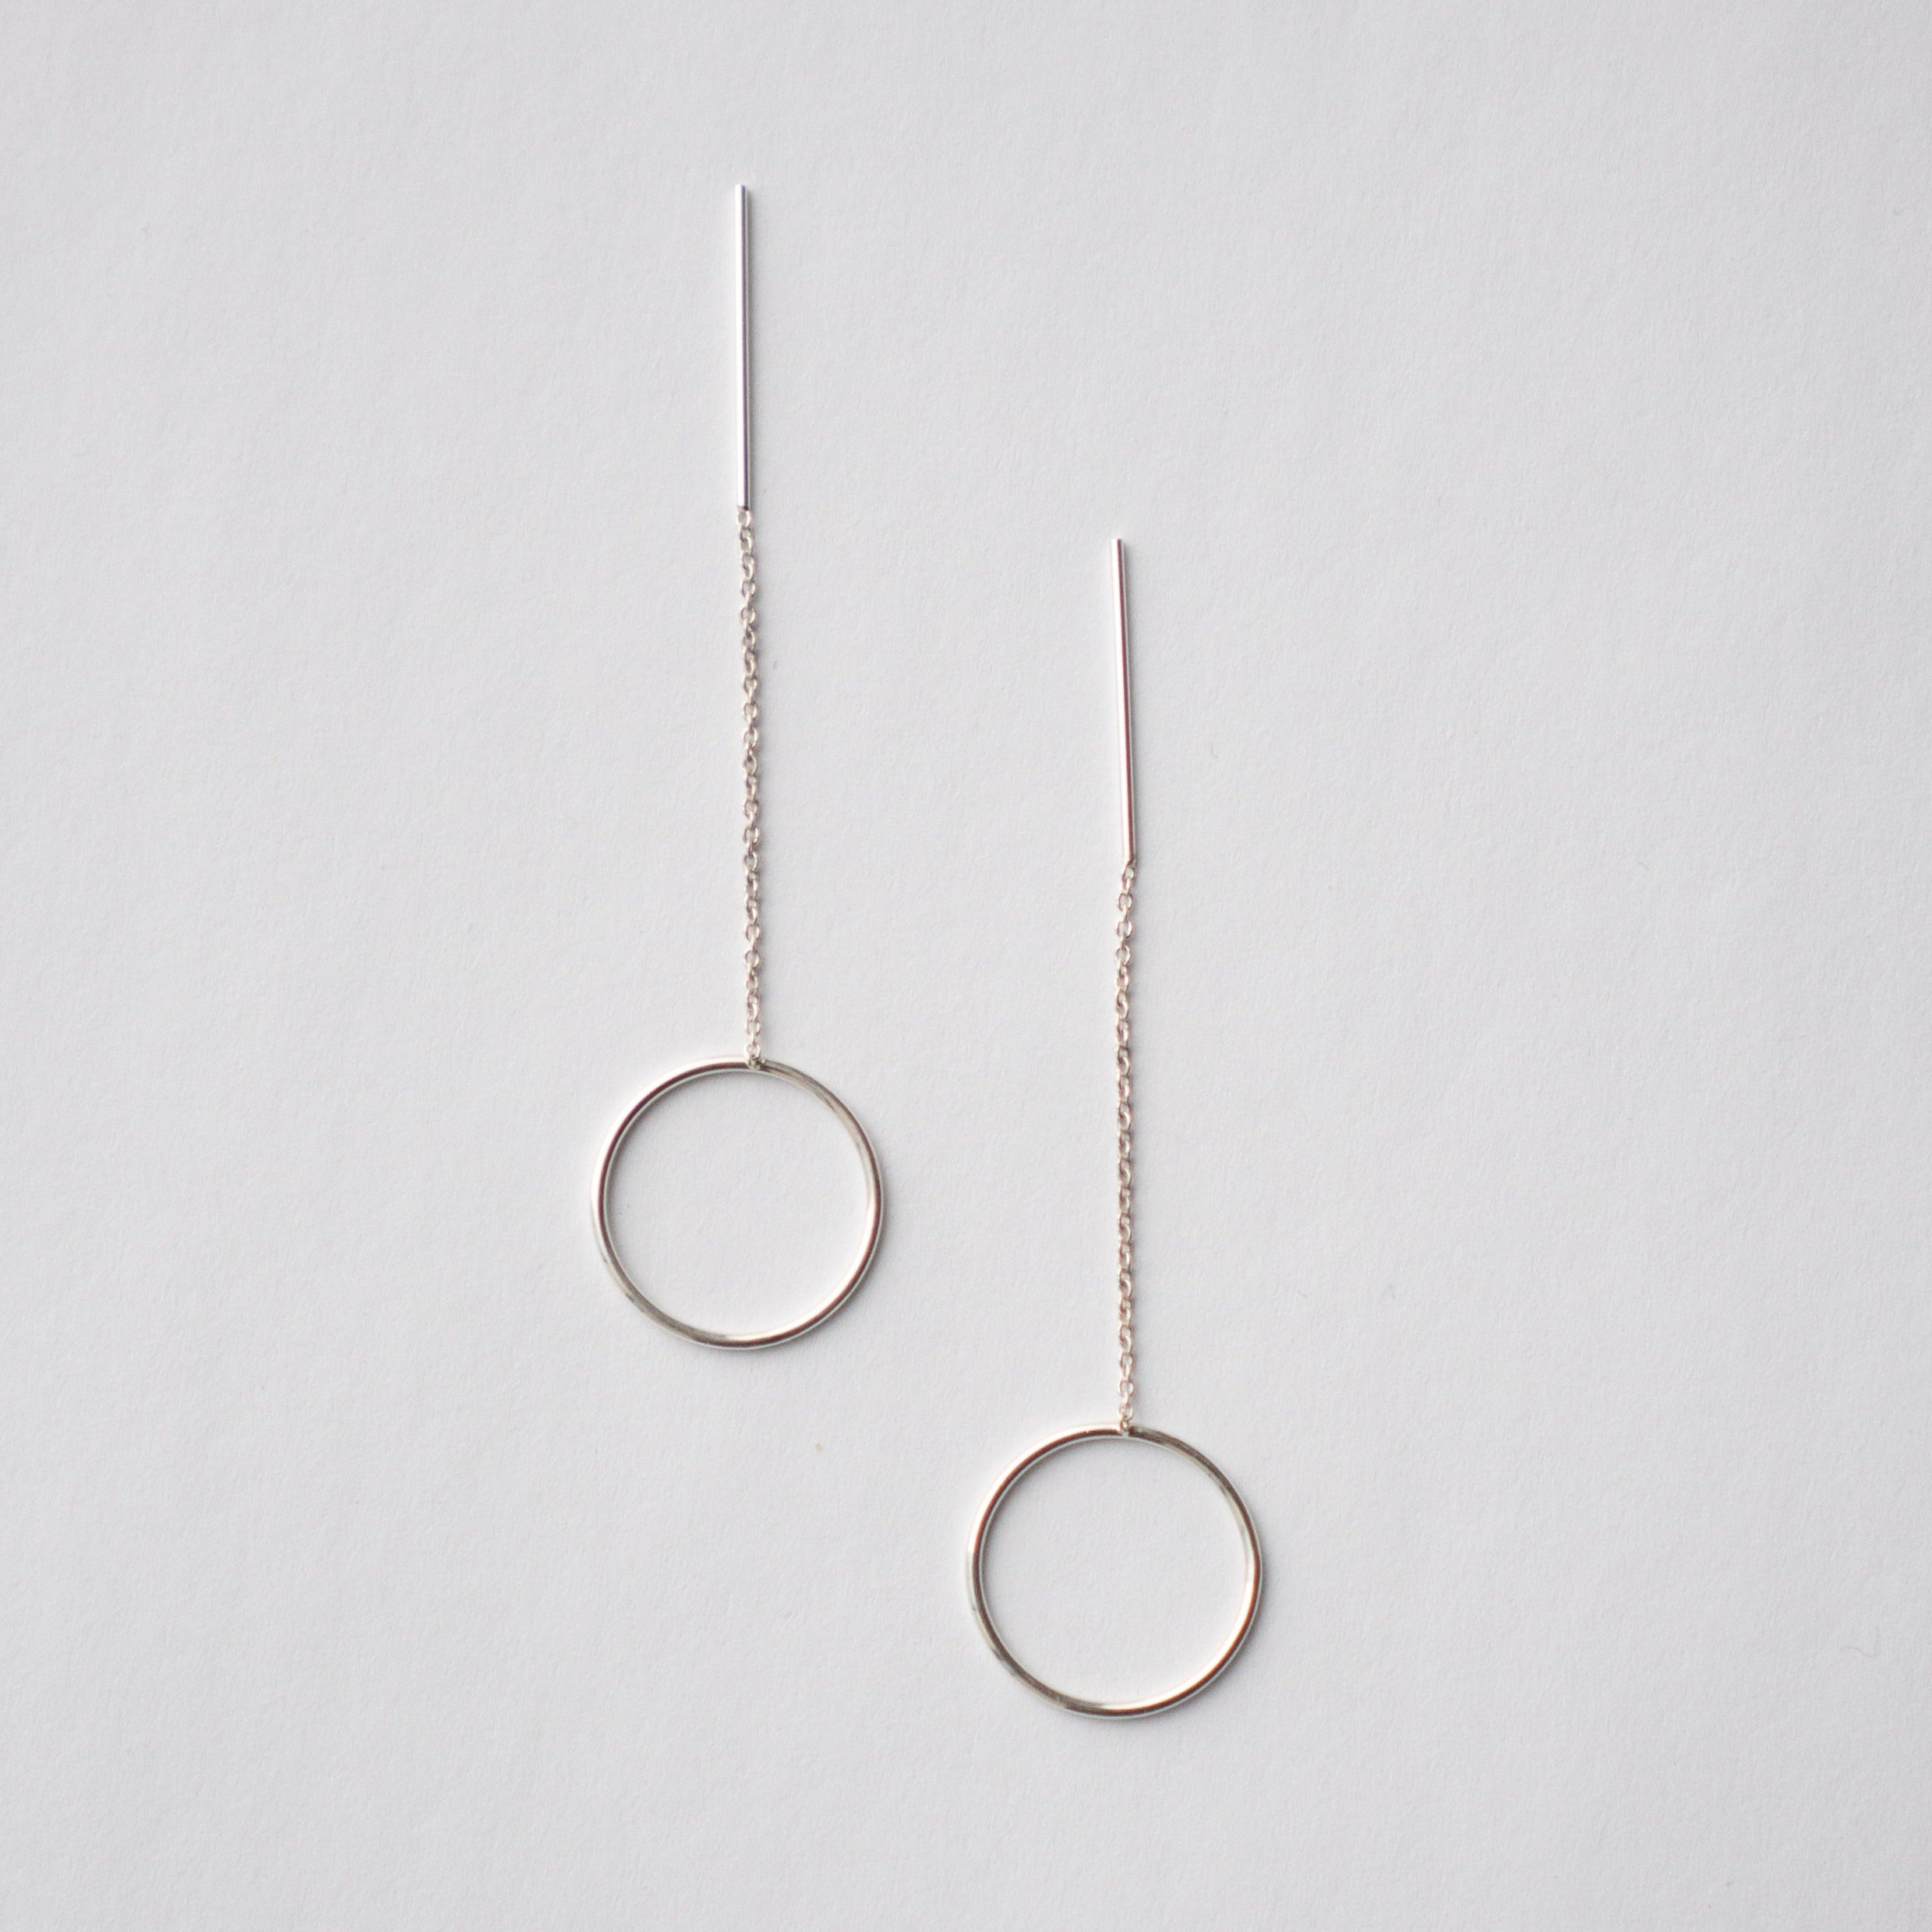 Designer Lili Pull-Through Circle earrings in 14k yellow gold by SHW Fine Jewelry in New York City